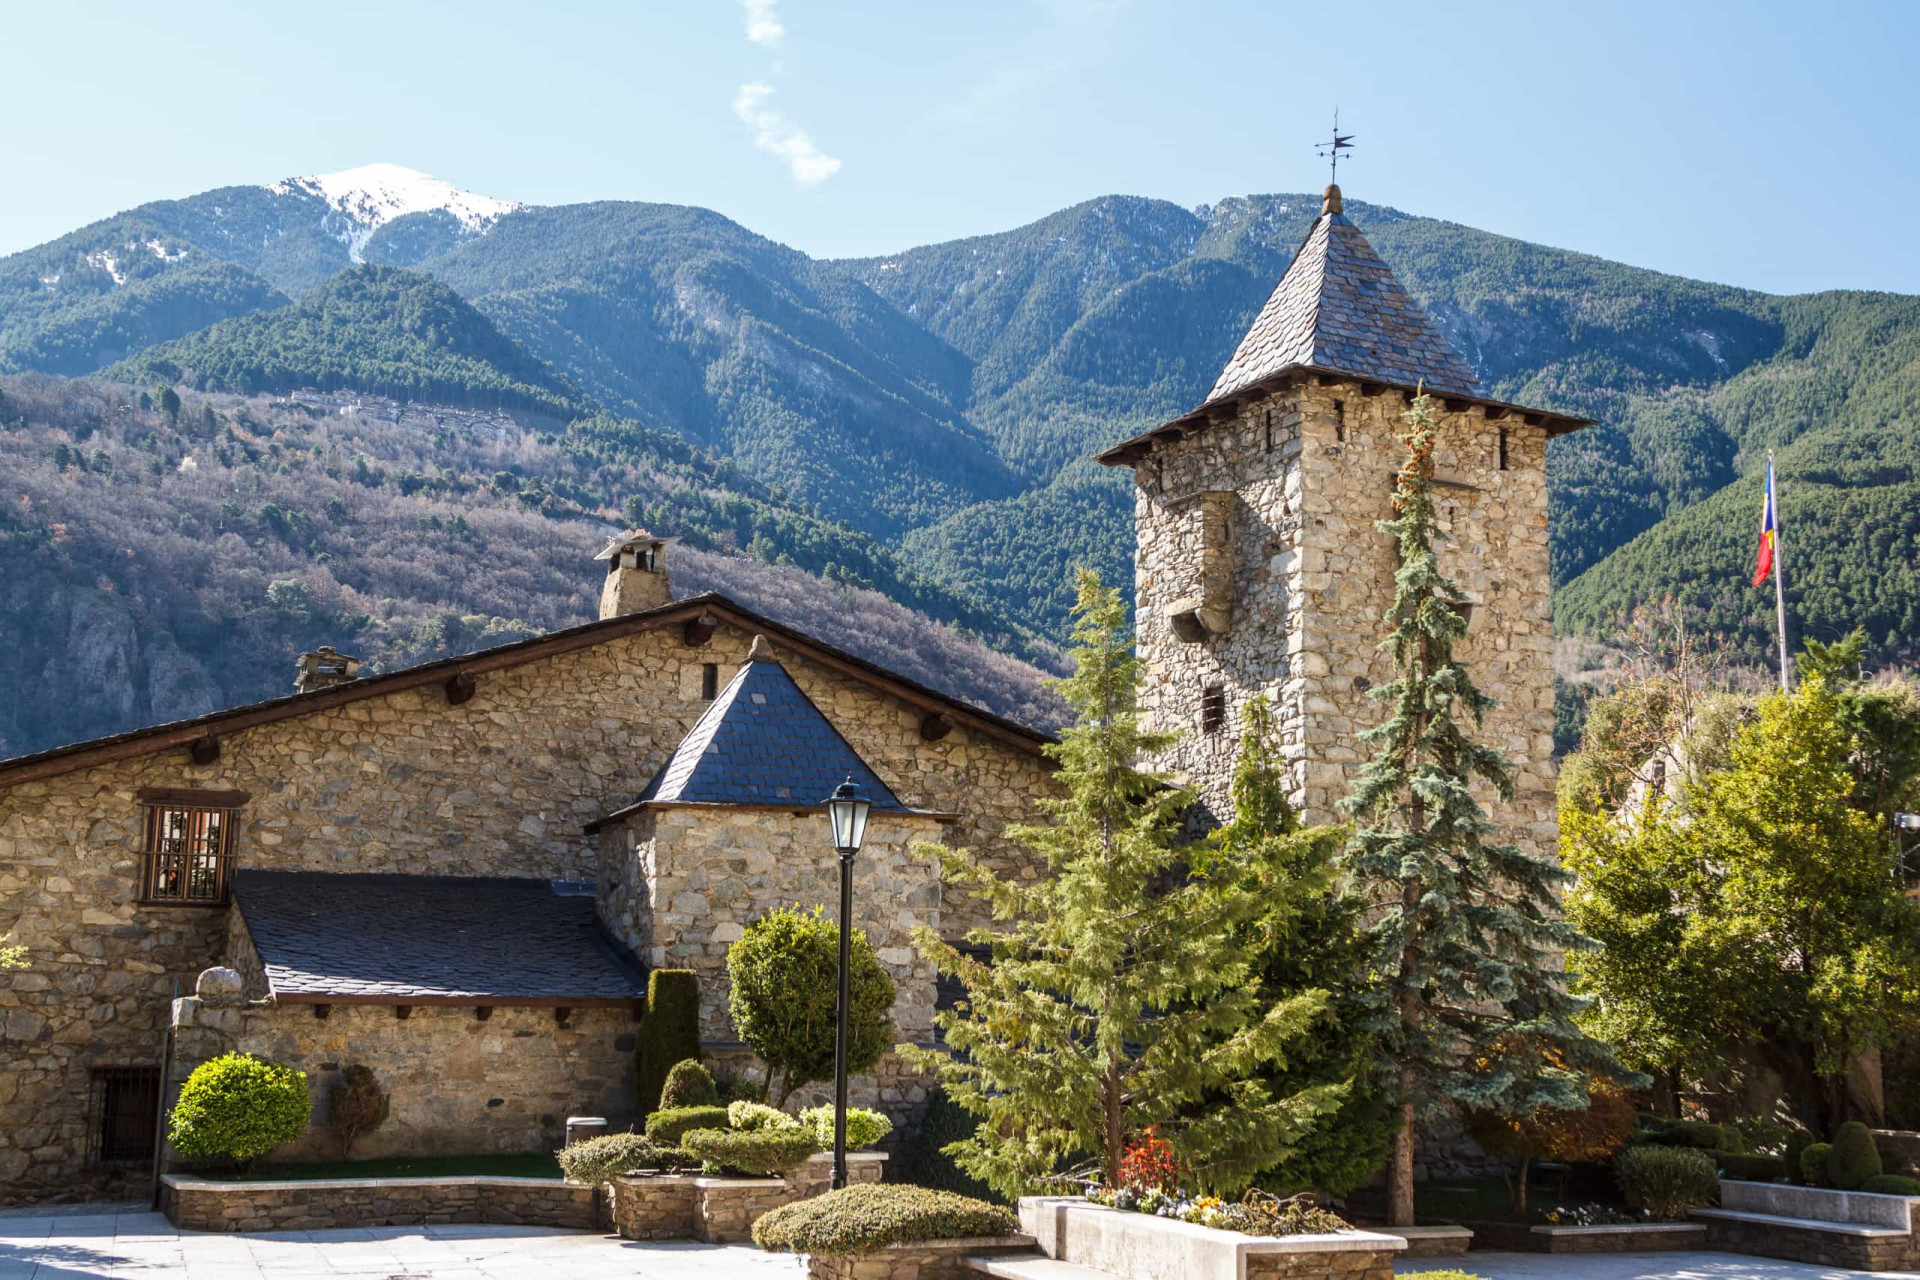 <p>The magnificent 16th-century manor known as Casa de la Vall, in the Andorran capital of Andorra la Vella, was once the seat of the Andorran government. Today, it is home to the Hall of Lost Steps, where visitors can appreciate the wonderfully preserved original wall paintings.</p><p><a href="https://www.msn.com/en-za/community/channel/vid-7xx8mnucu55yw63we9va2gwr7uihbxwc68fxqp25x6tg4ftibpra?cvid=94631541bc0f4f89bfd59158d696ad7e">Follow us and access great exclusive content every day</a></p>